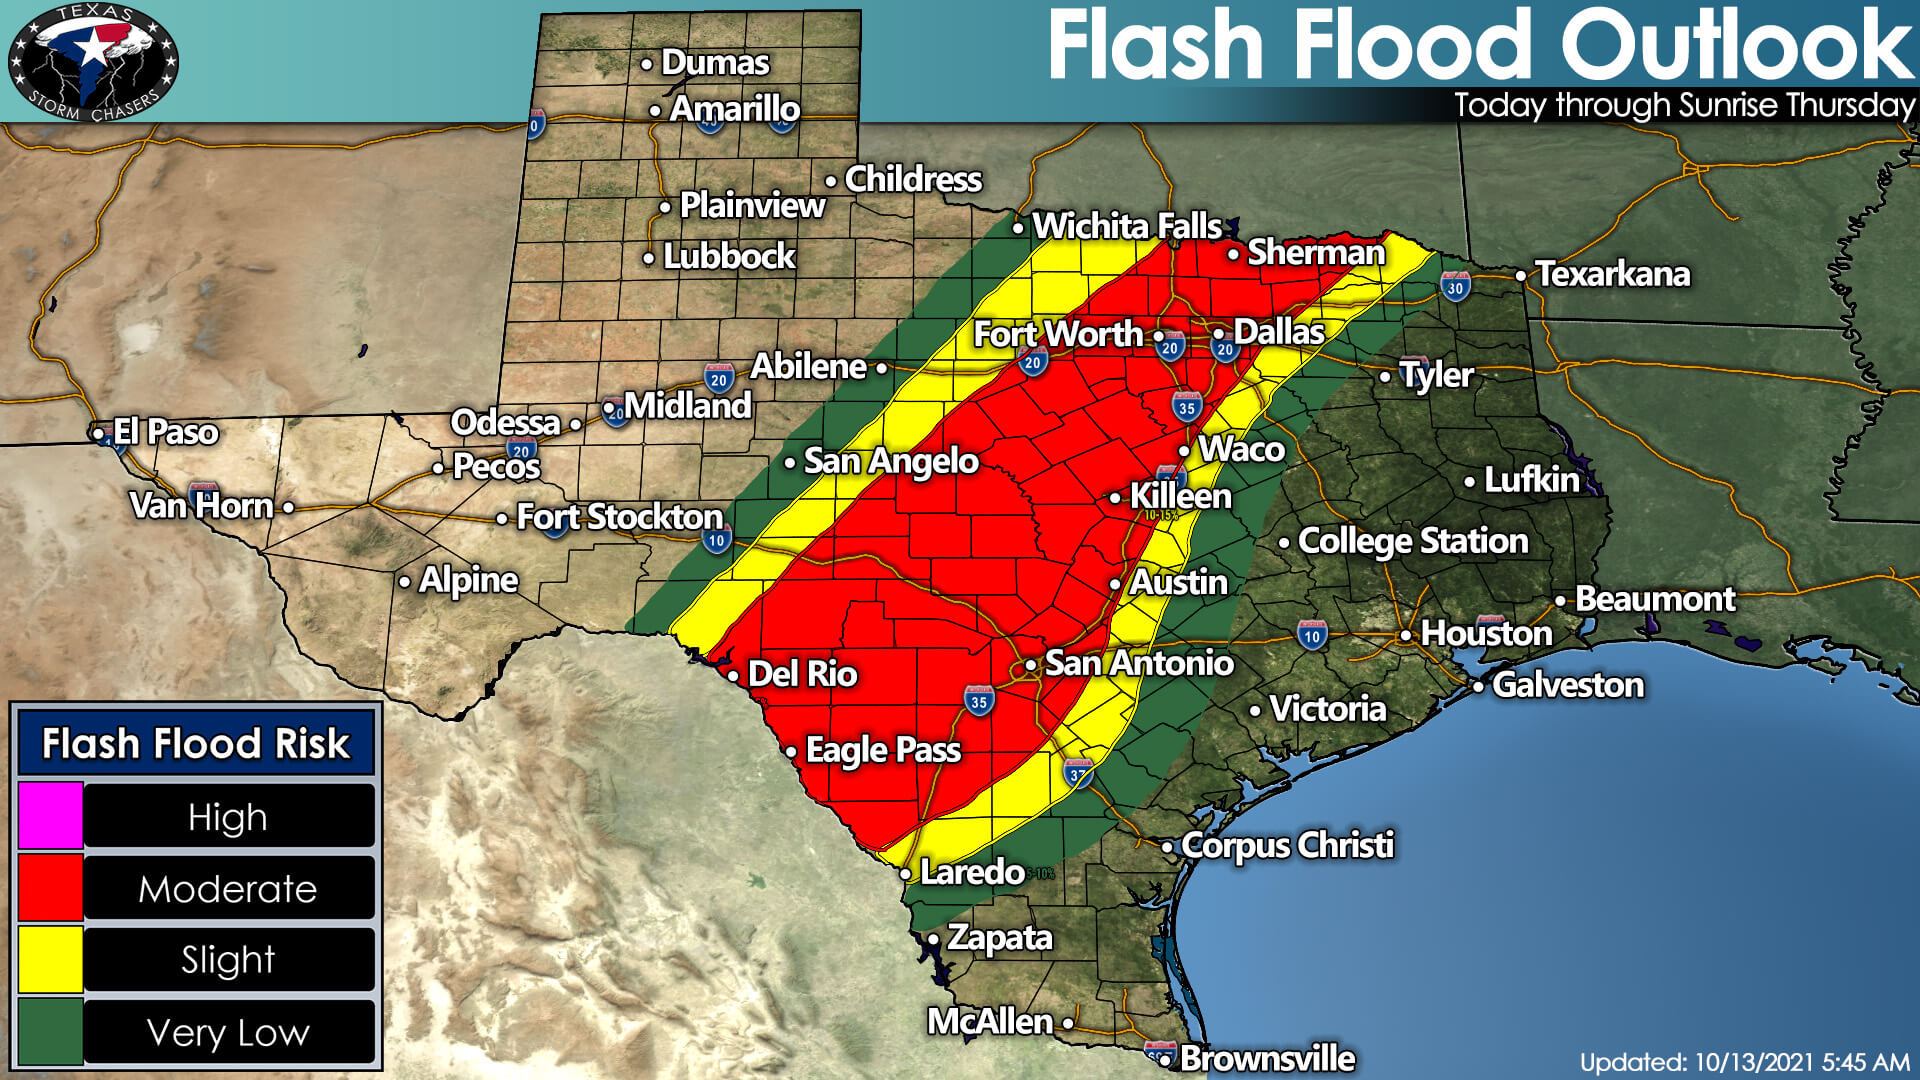 Moderate Risk of Flooding Later Today – Thursday Morning from D/FW to San Antonio & Del Rio